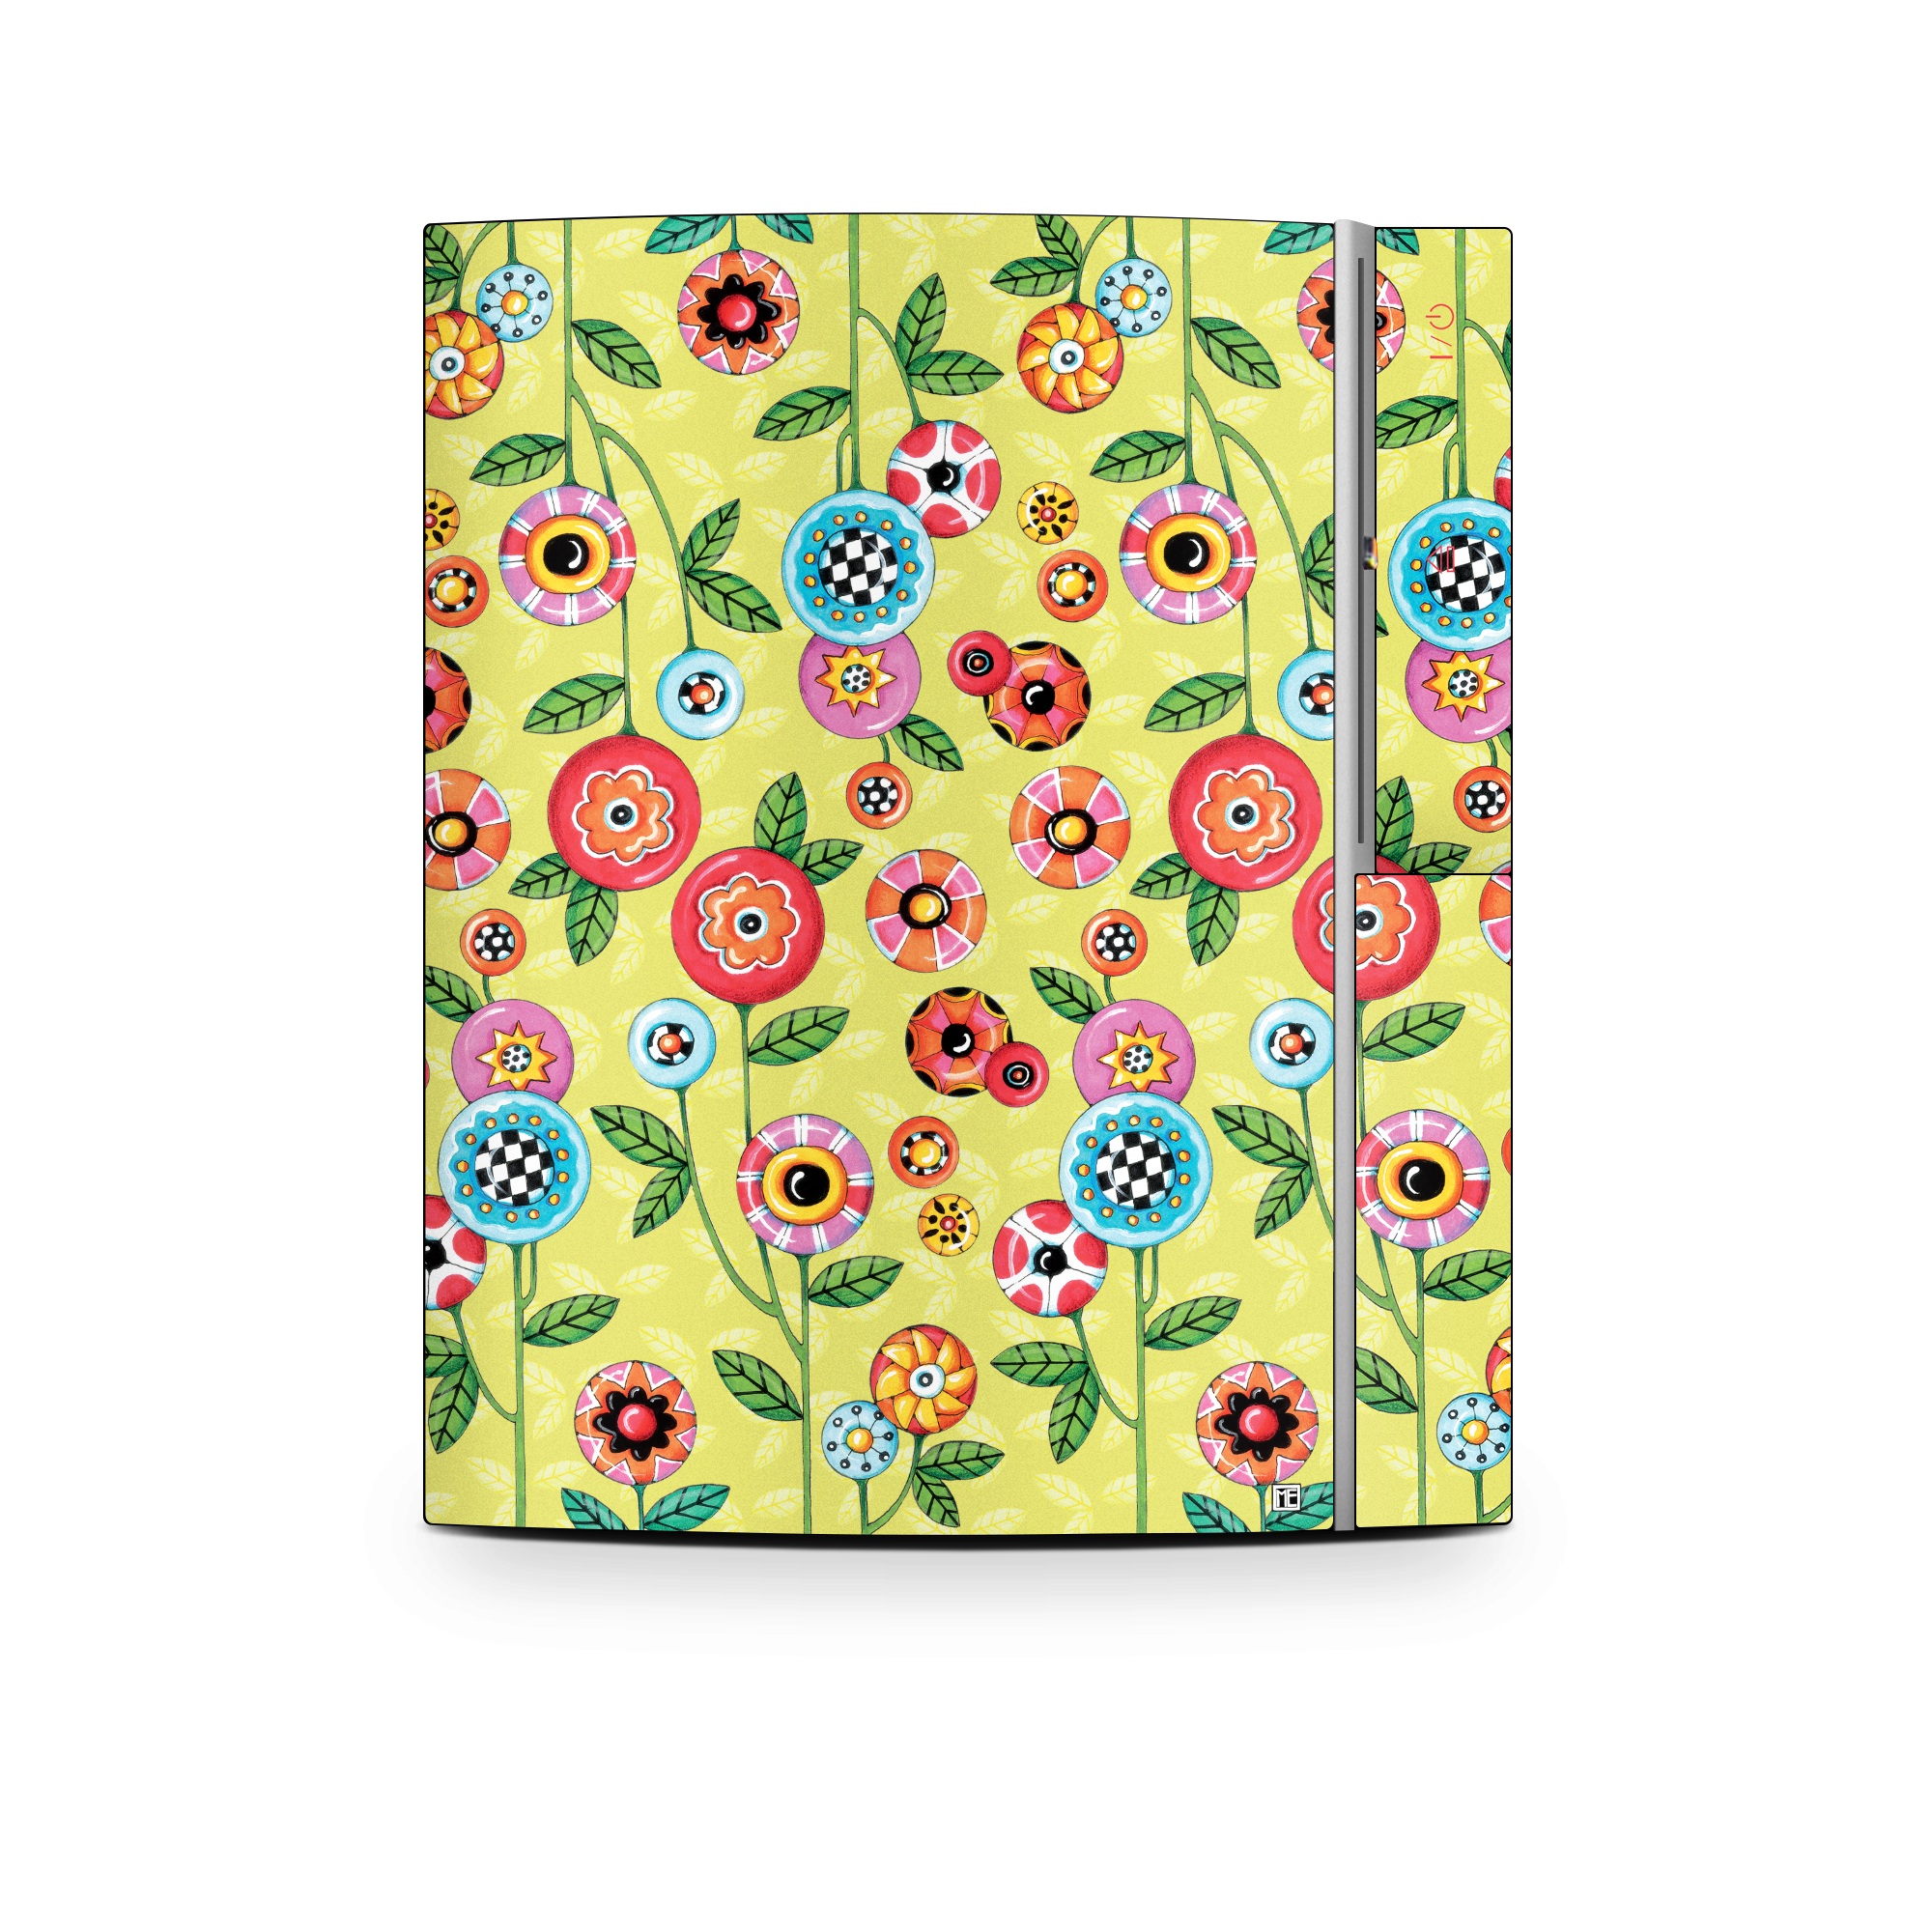 PS3 Skin - Button Flowers (Image 1)